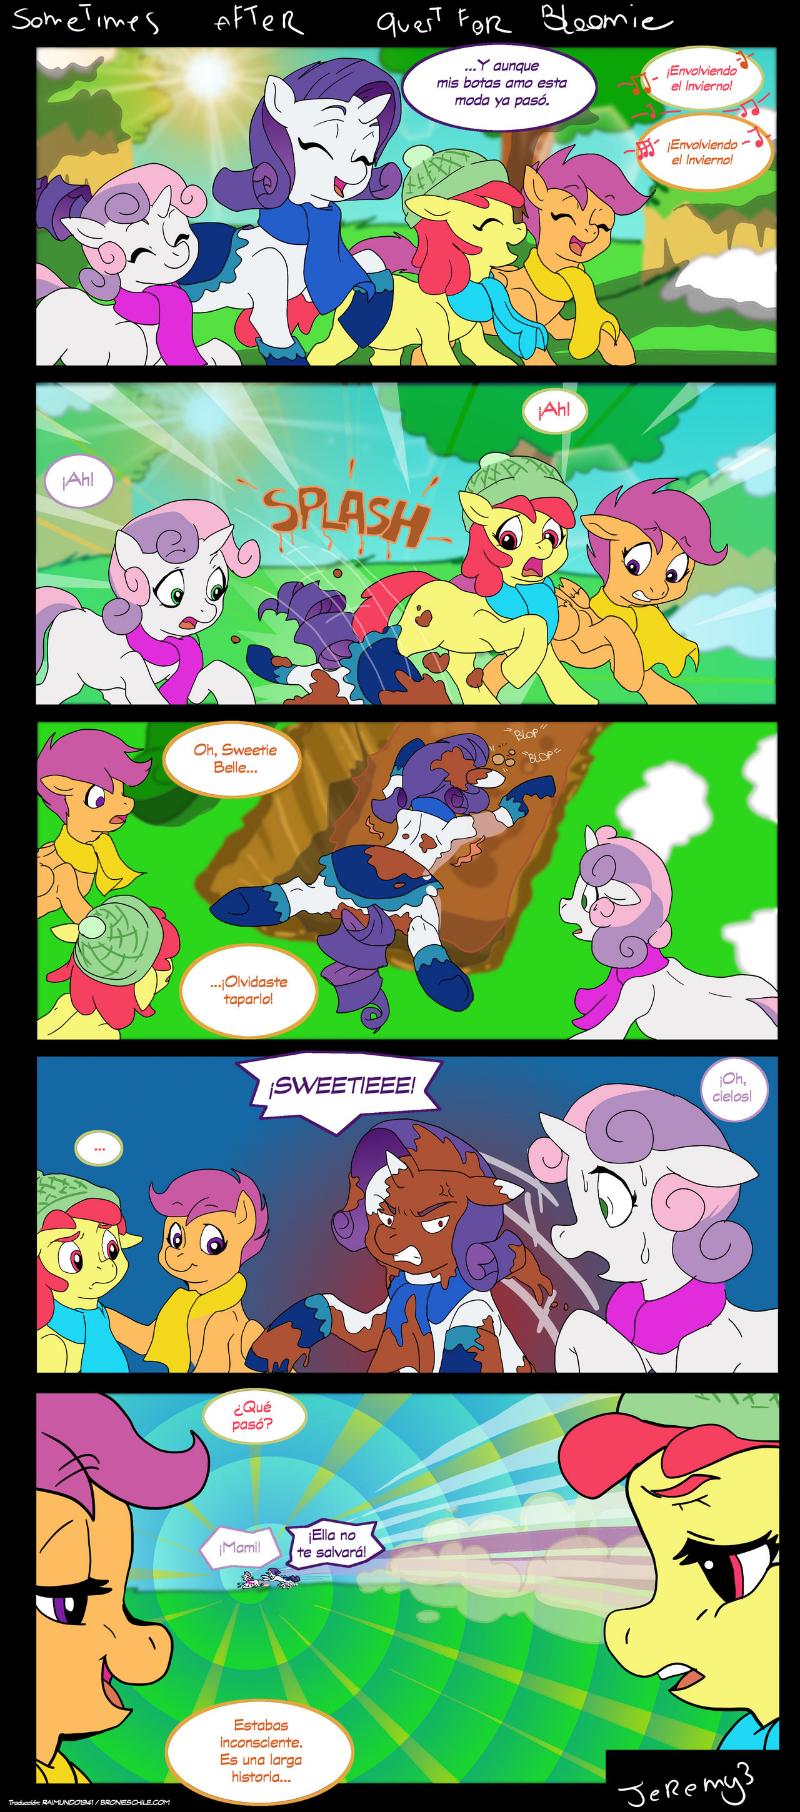 After Quest for Apple Bloom